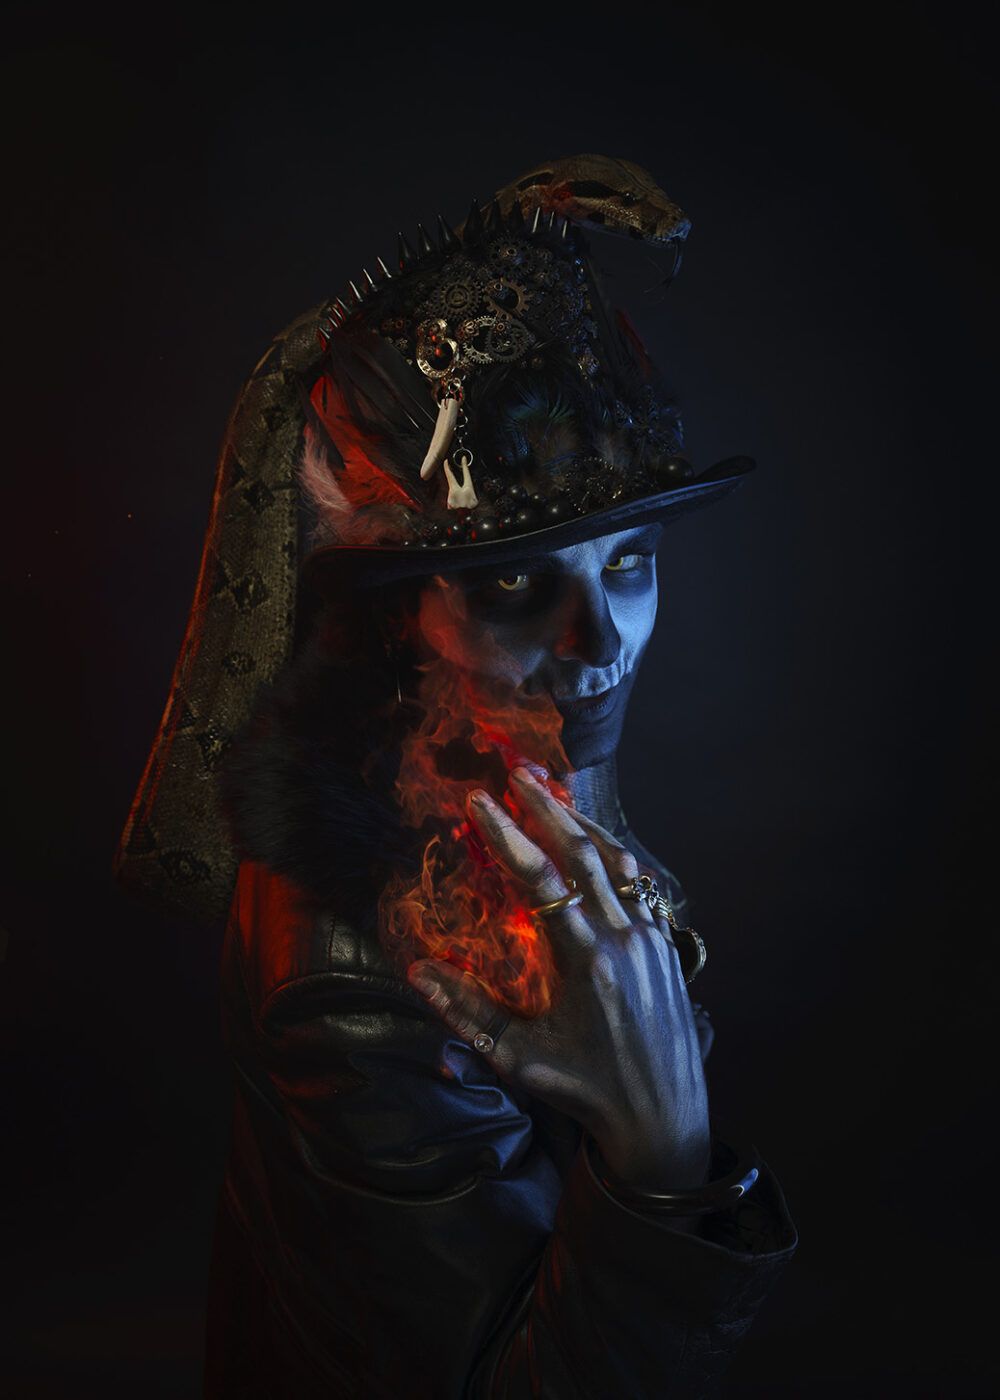 Baron Samedi Holding a Fire with Python on his hat